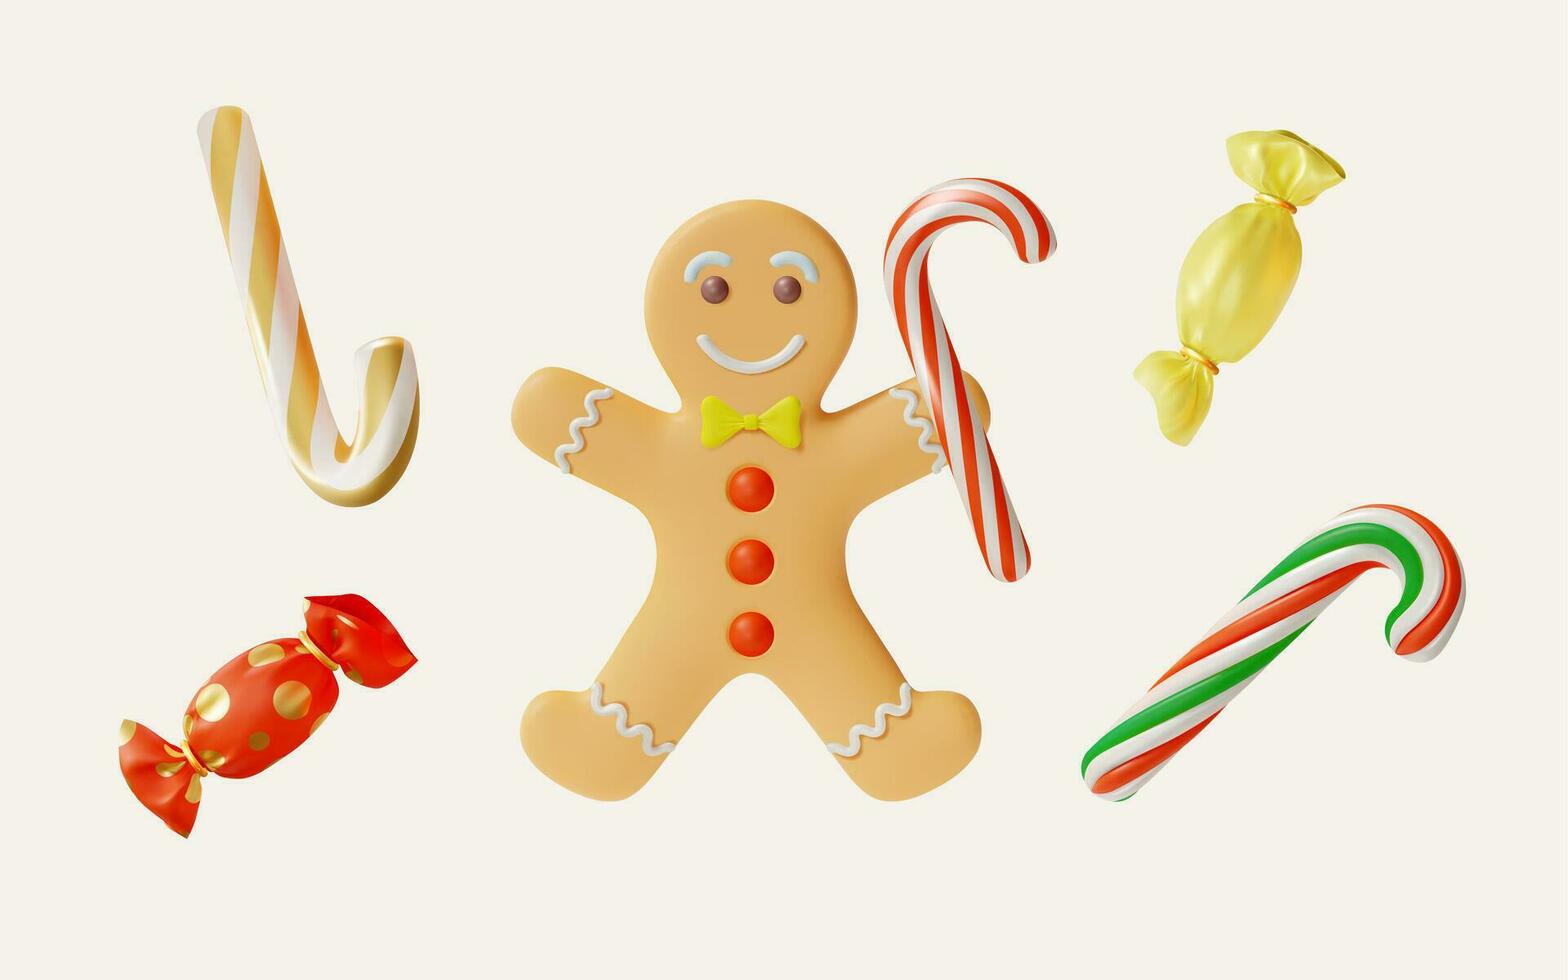 3d Merry Christmas and Happy New Year Concept Gingerbread Man and Traditional Xmas Candy Set Cartoon Style. Vector